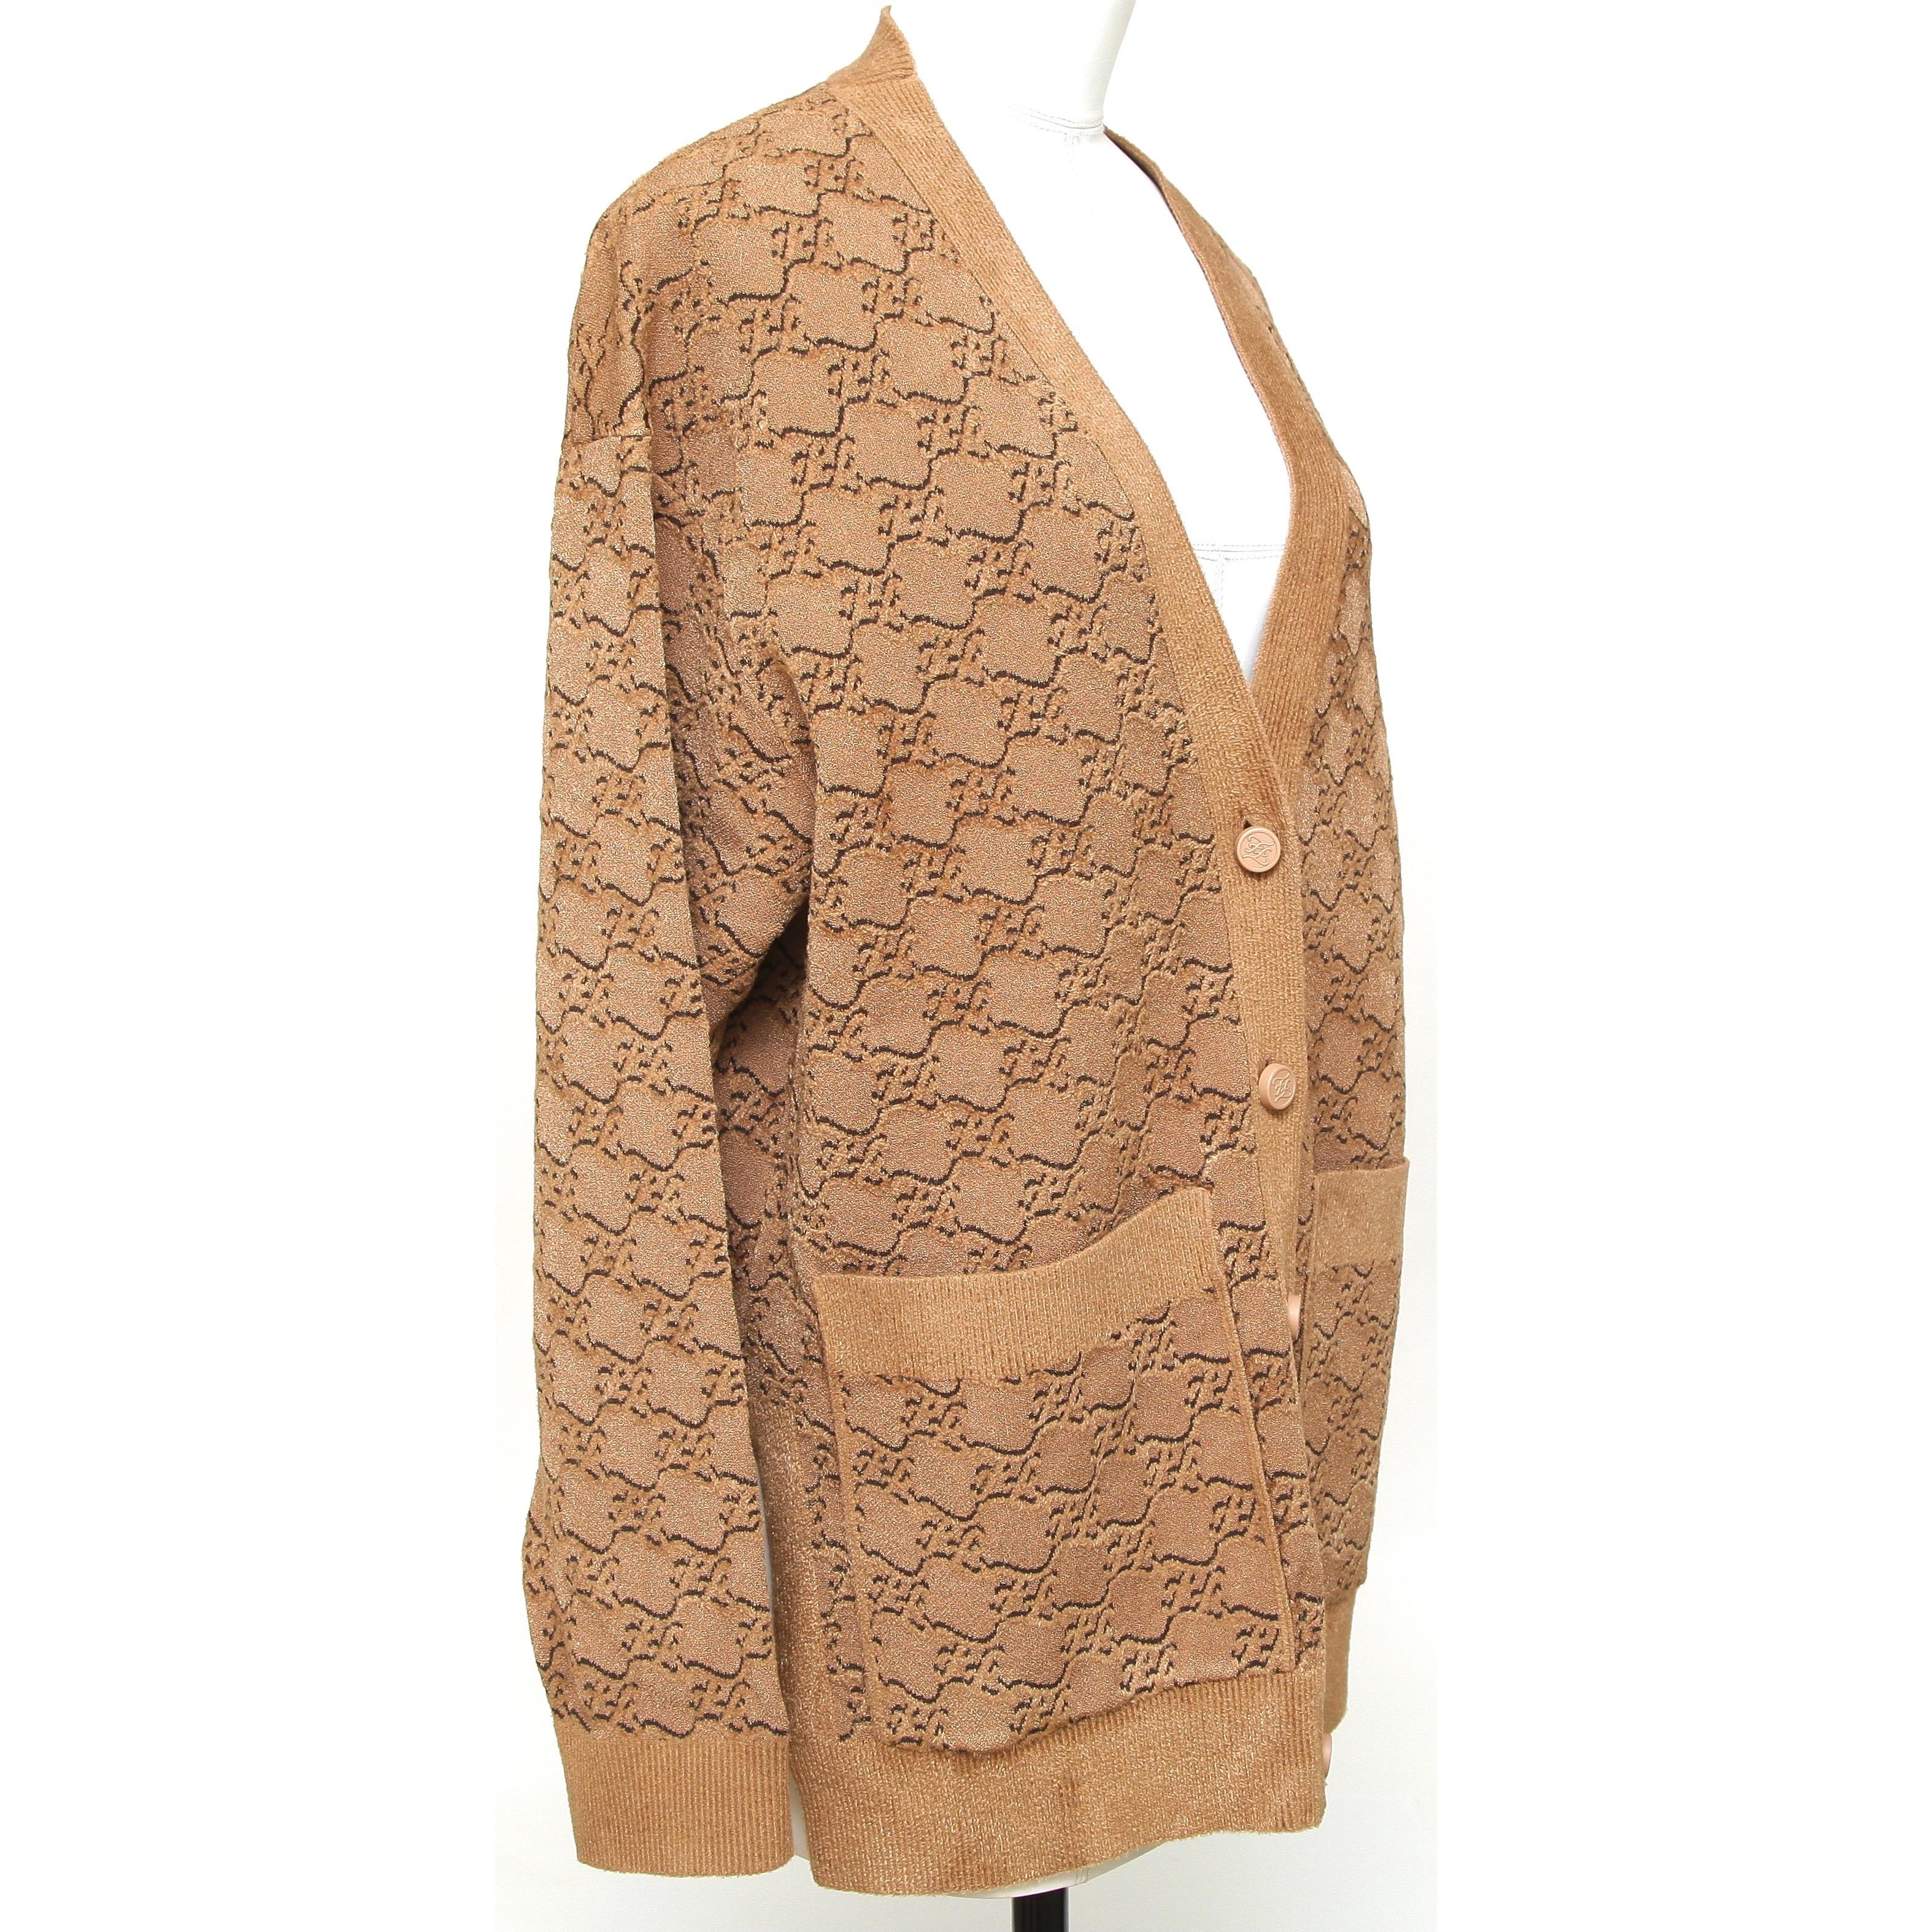 GUARANTEED AUTHENTIC FENDI KARLIGRAPHY OVERSIZED CARDIGAN

Details:
- Oversized relax fit with the Karligraphy print.
- V-neck, 3 front button closure.
- Vents at end of sleeves.
- Easy to wear.

Size: 36

Fabric: 77% Viscose, 12% Polyester, 11%